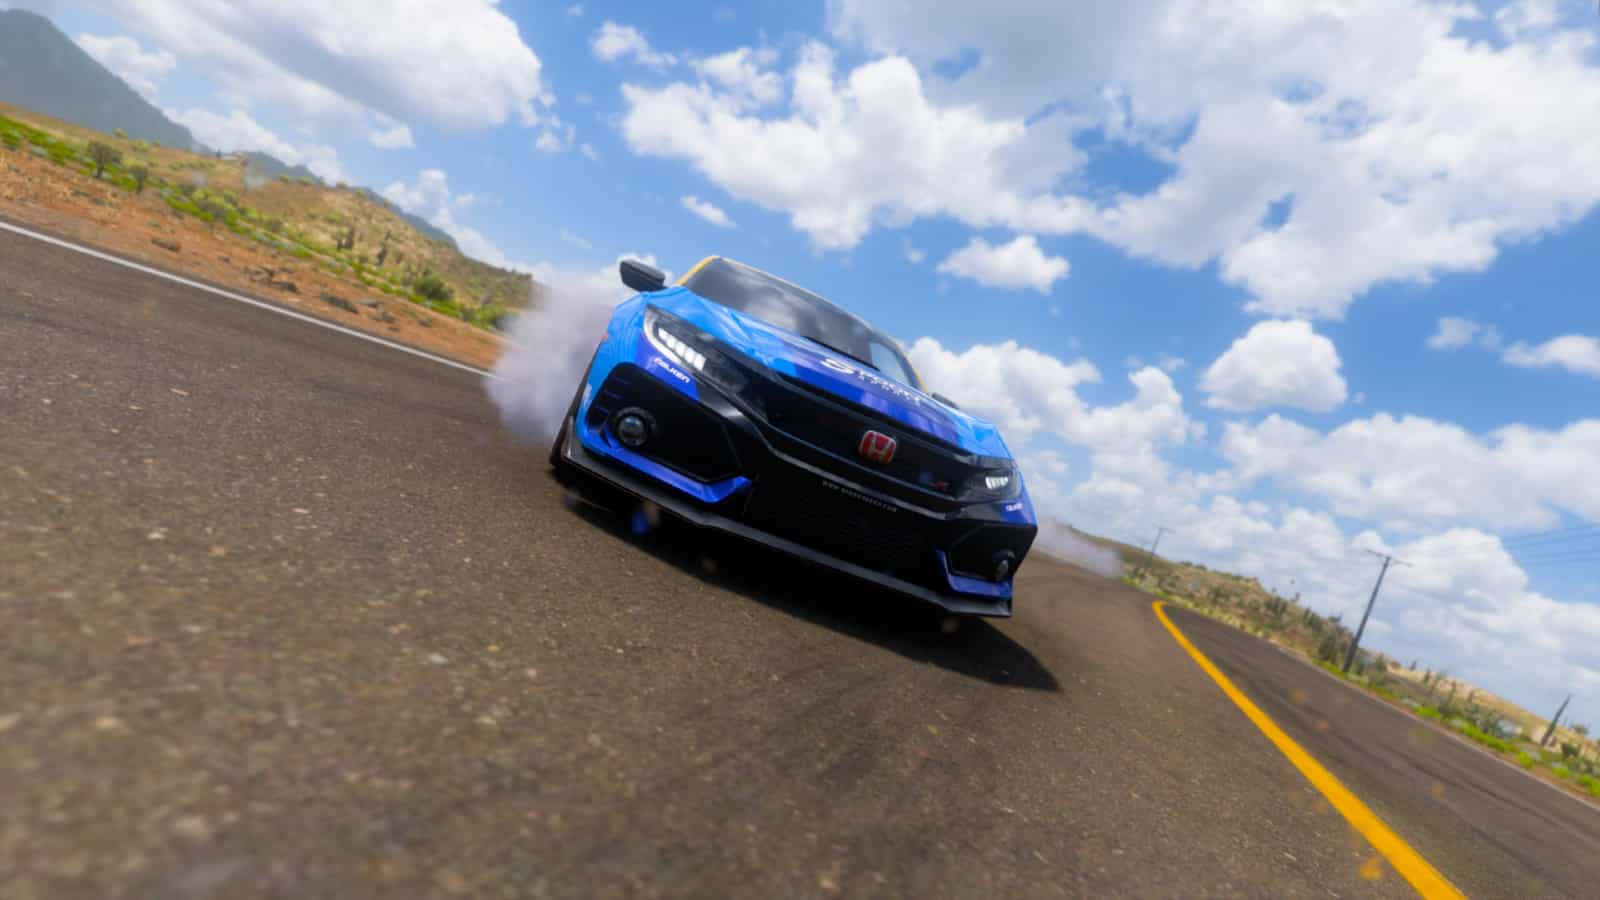 Forza Horizon 5's drifting mechanics are much improved from FH 4